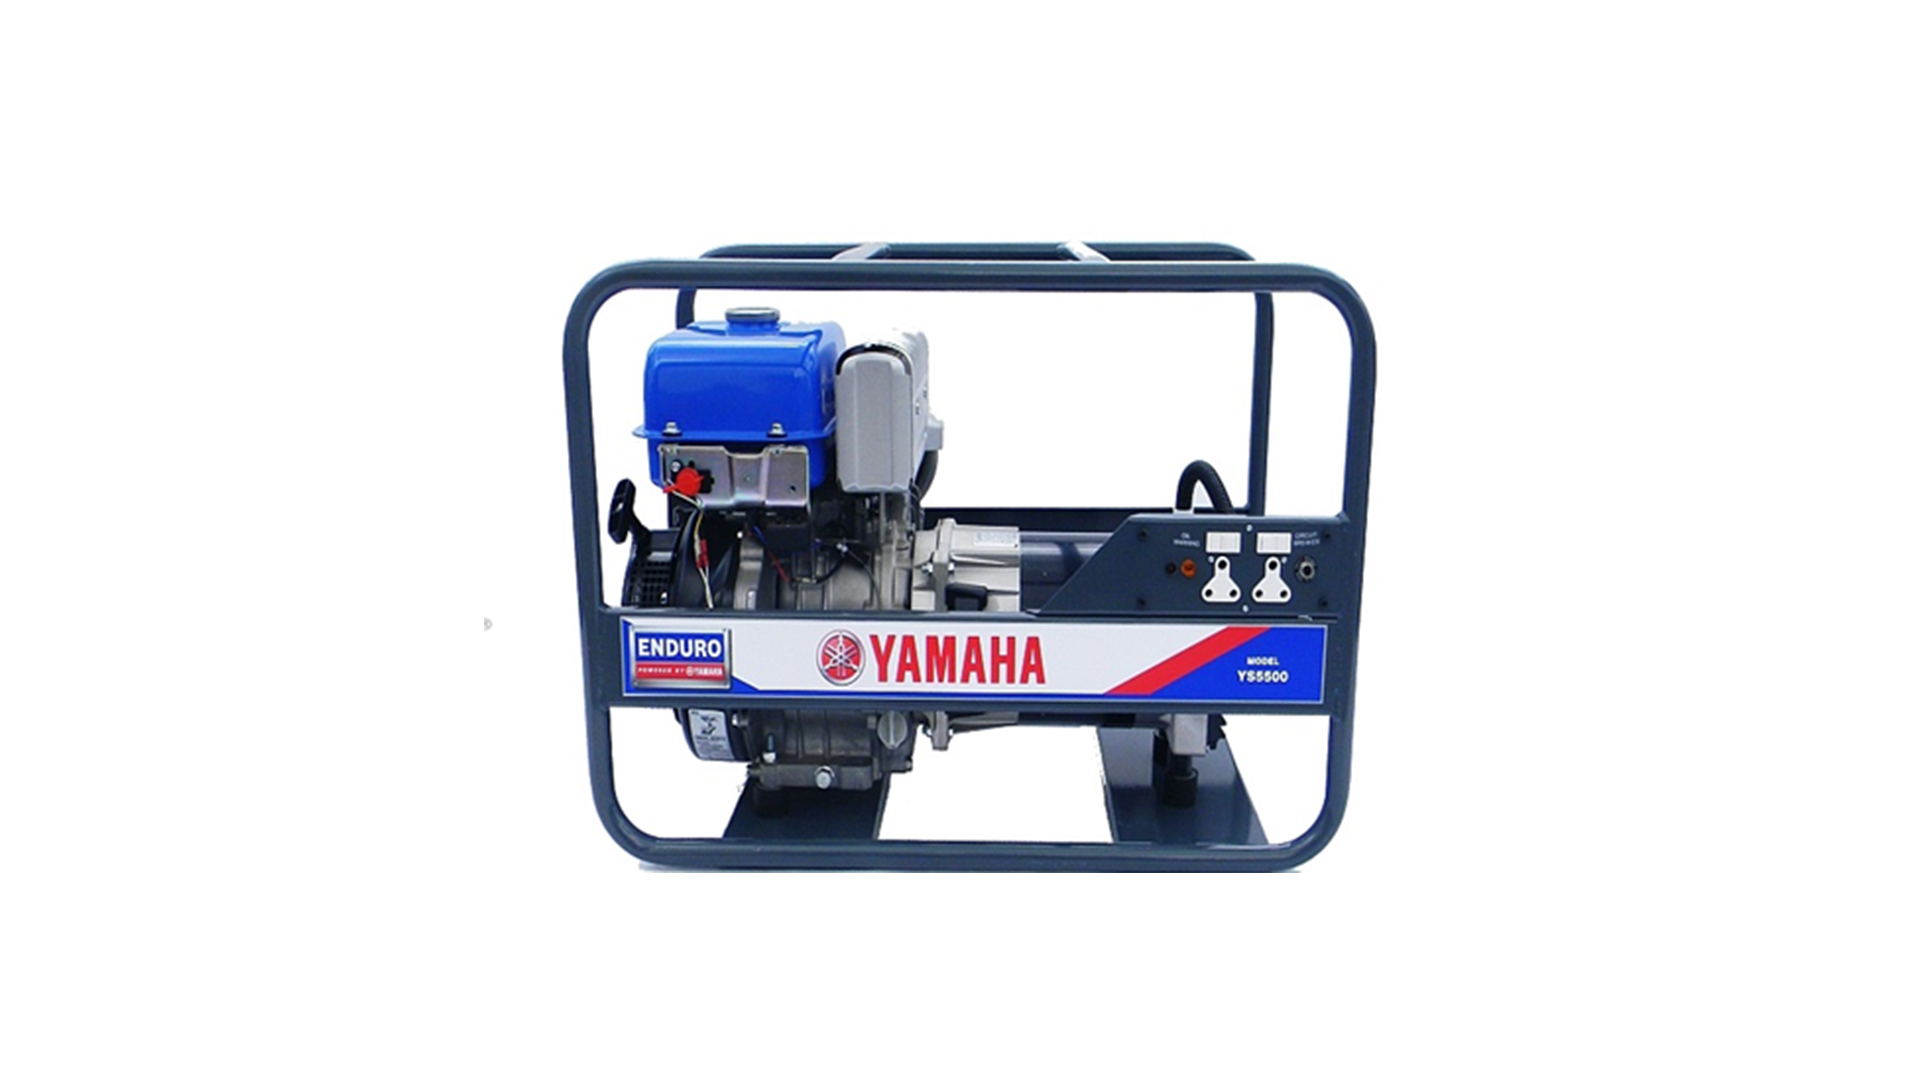 YAMAHA YS5500 GENERATOR  - THE HIGH POWERED PERFORMER:
'The YS5500 is Enduro’s maximum power generator. Up to 25 amps and 6,2Kva output. Fitted with a powerful 12hp engine, featuring low oil automatic cut off and sound conscious muffler on exhaust.